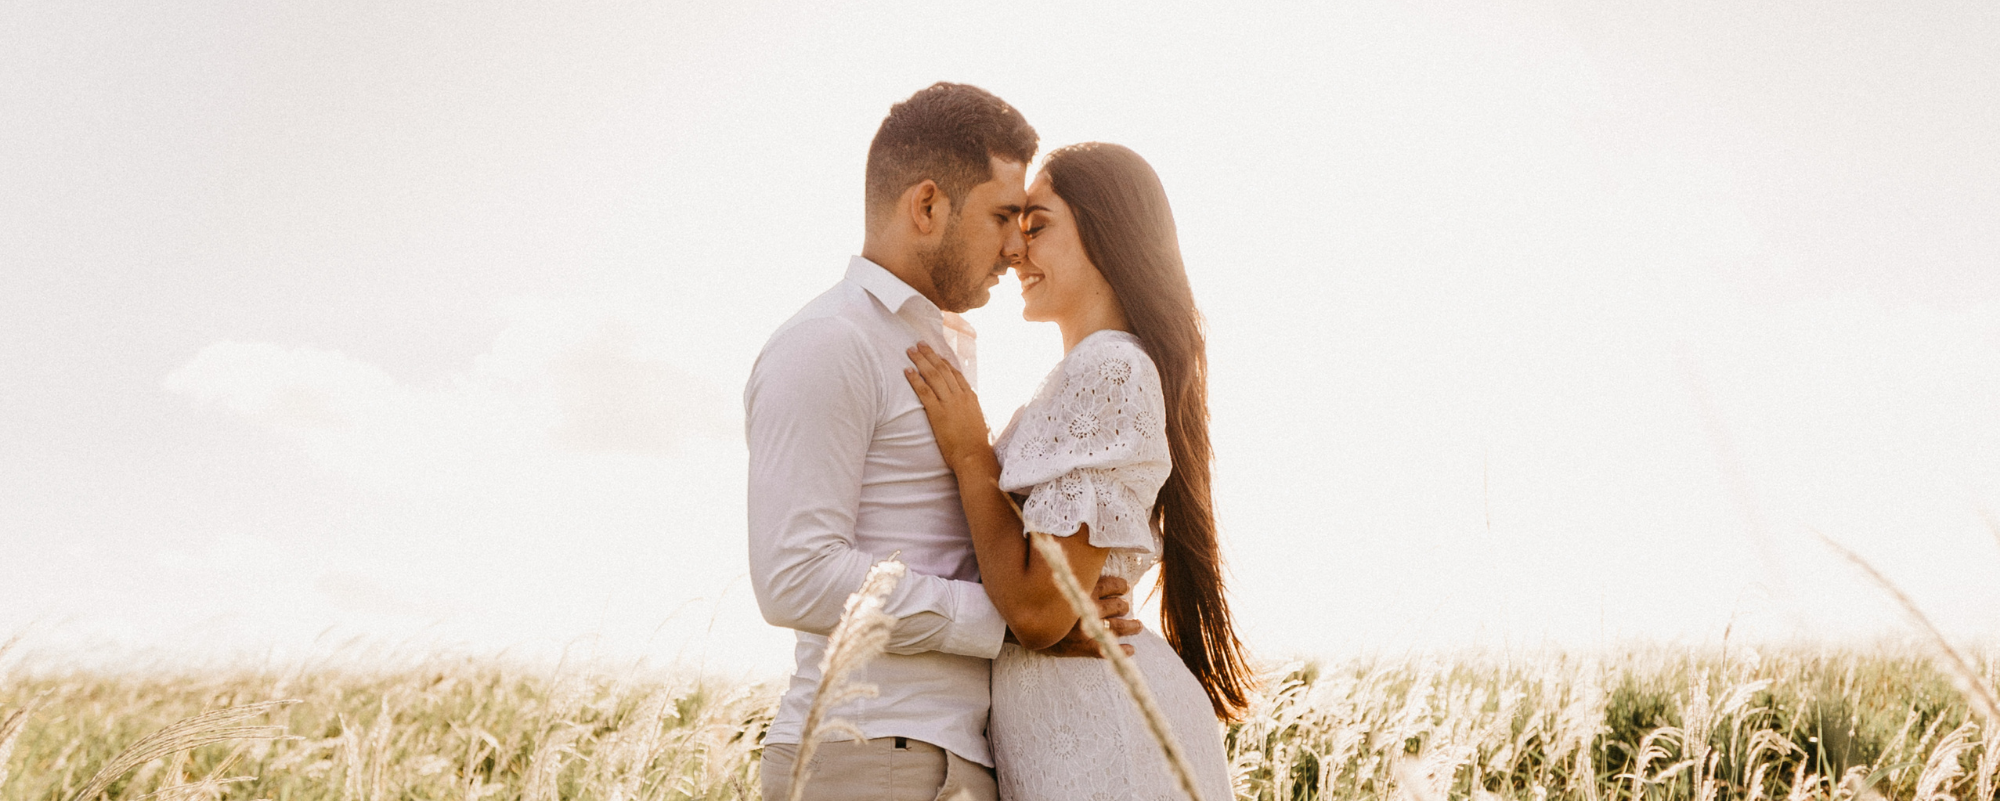 couple embracing for a photoshoot in an open meadow 